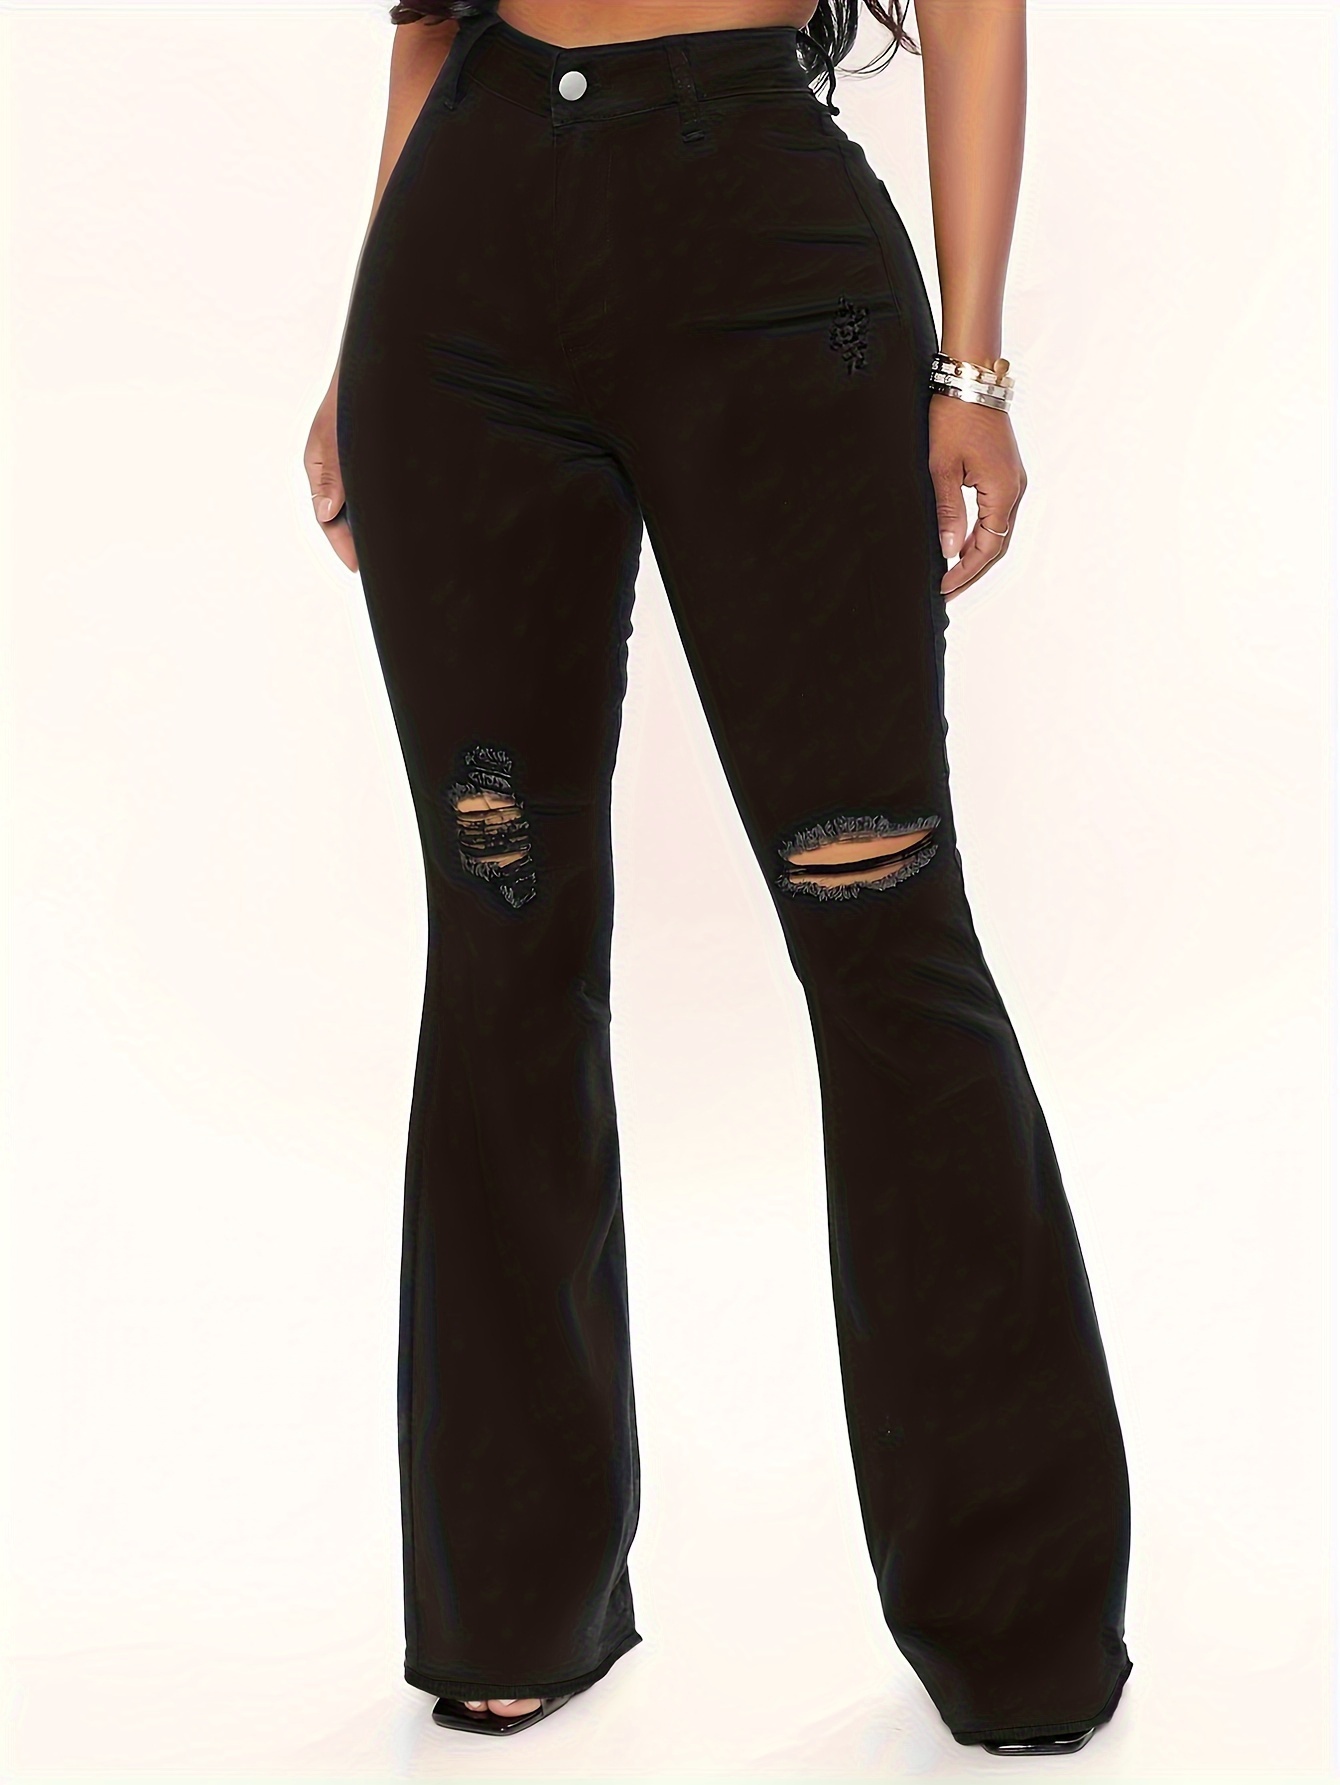 Y2K Style Washed Flare Jeans, Slant Pockets High Stretch Bell Bottom Jeans,  Women's Denim Jeans & Clothing